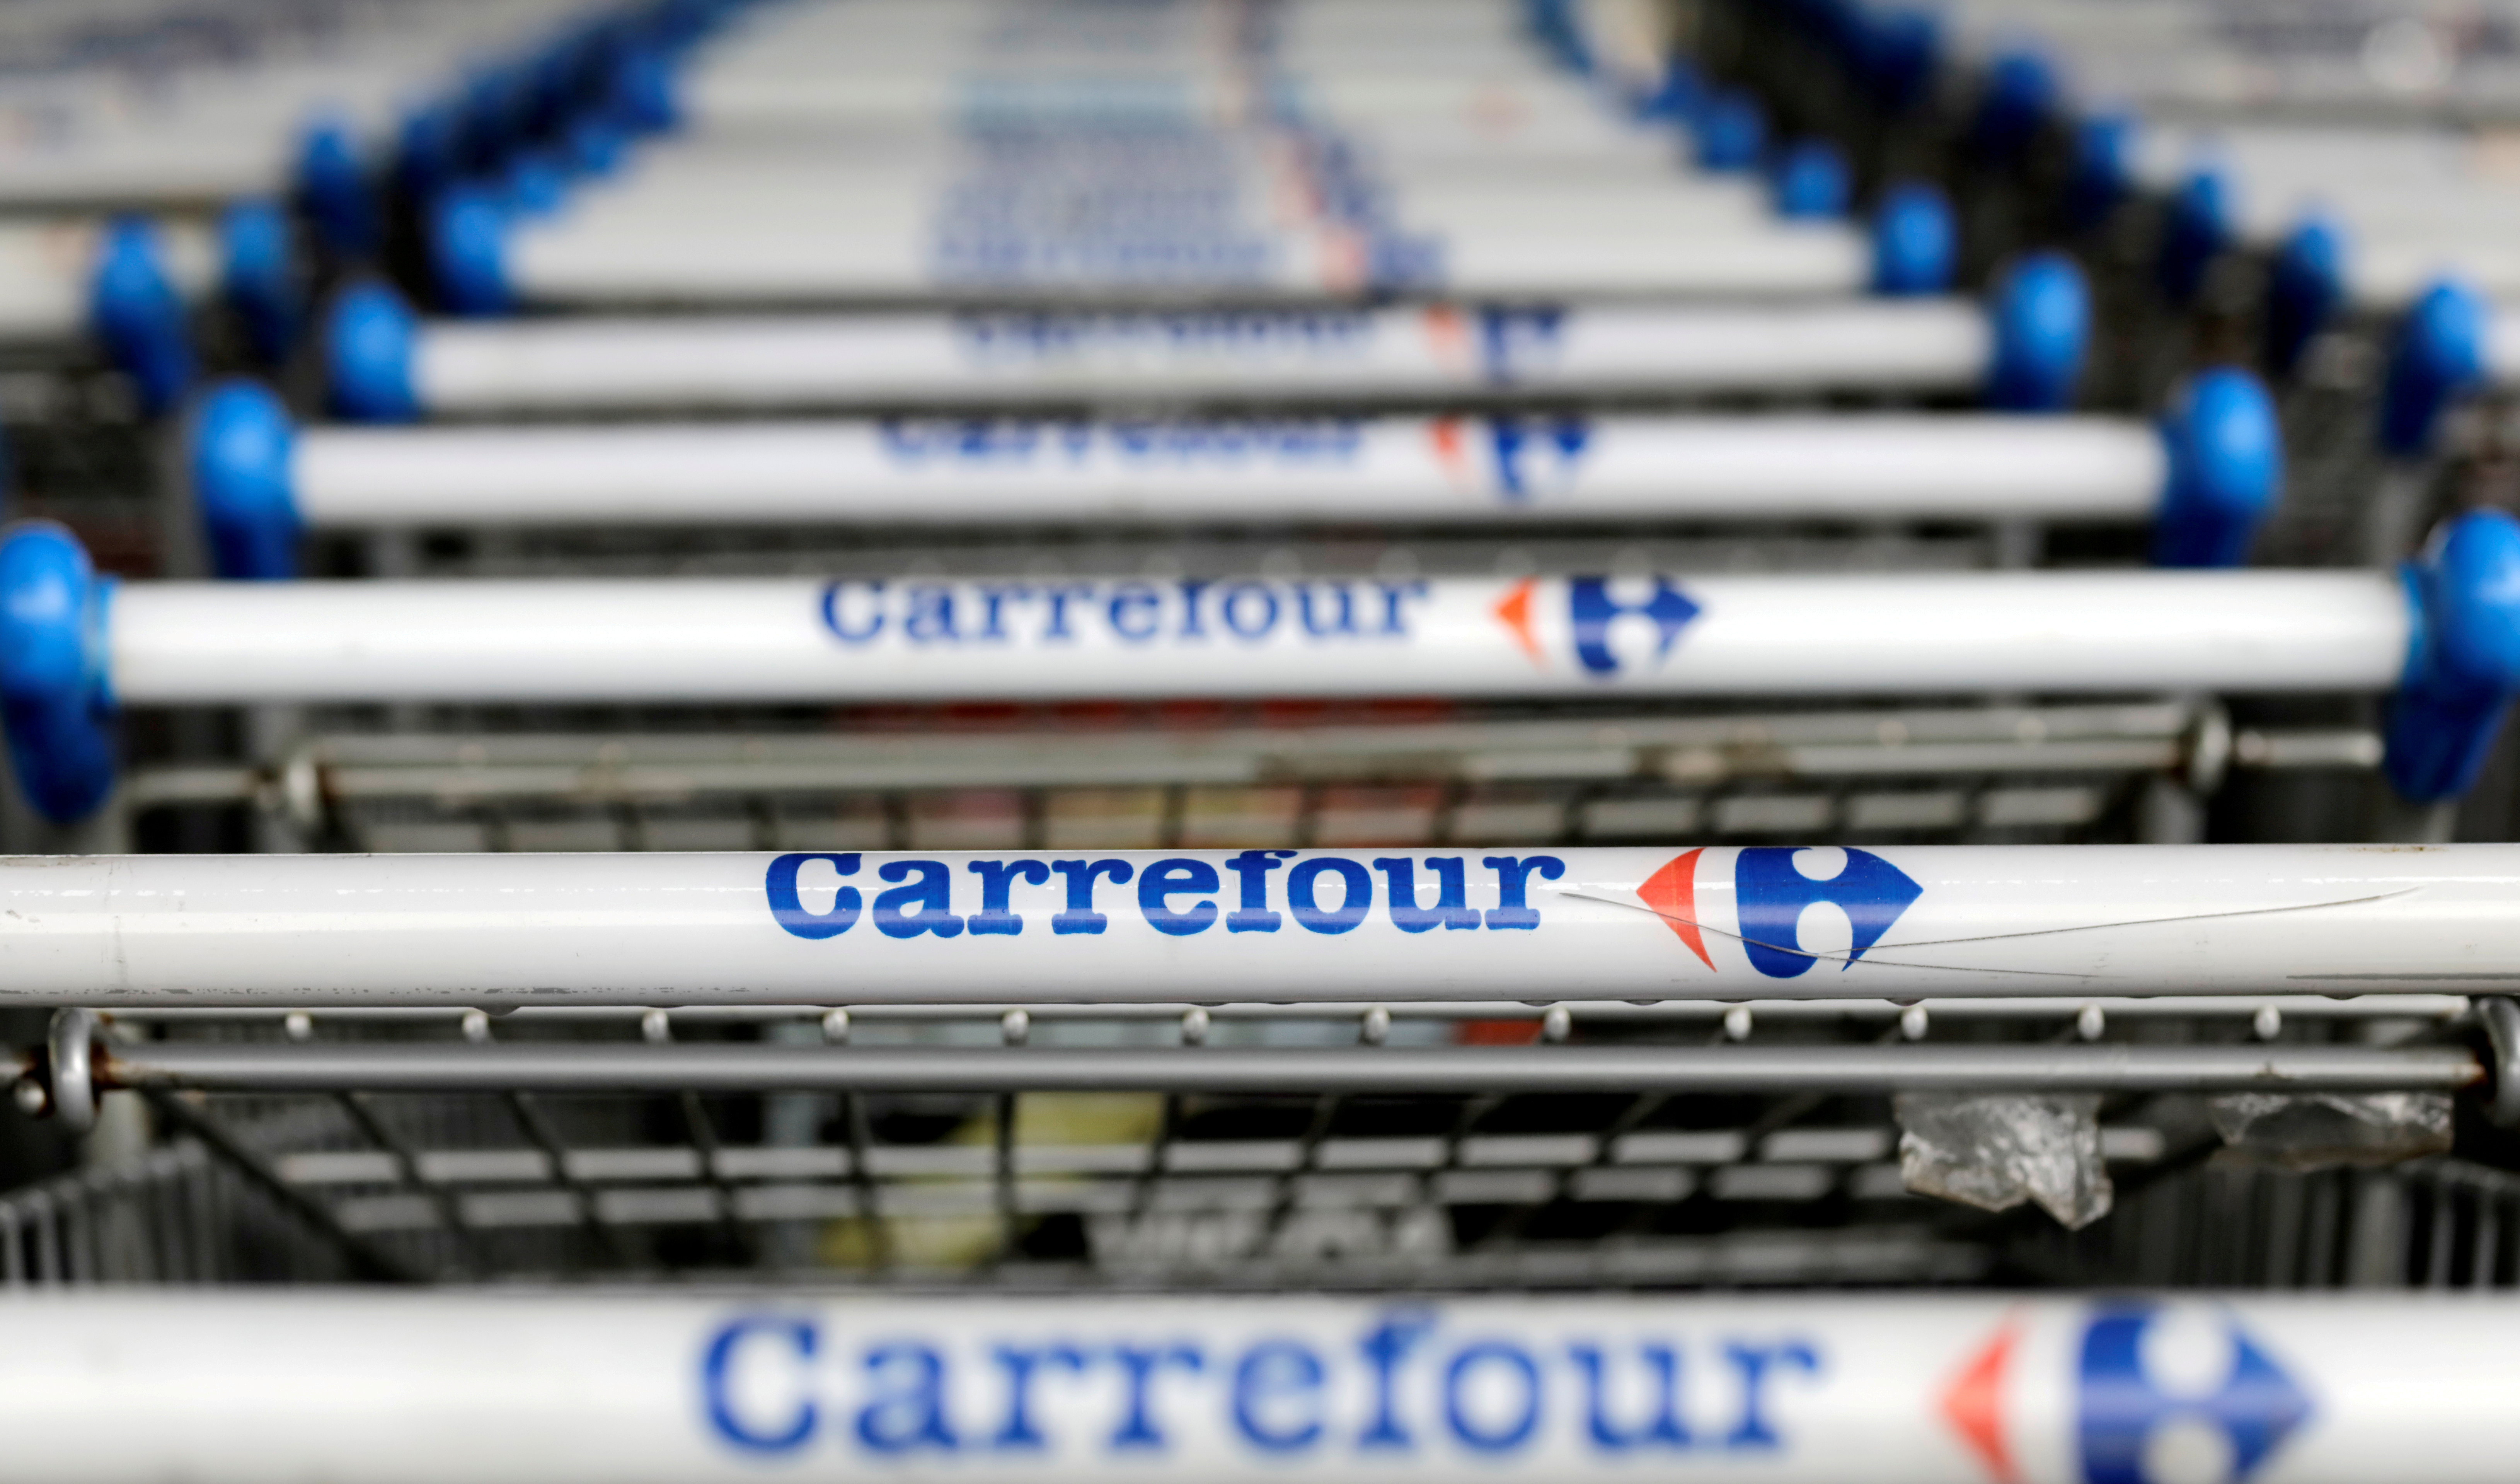 The logo of French retailer Carrefour on shopping trolleys in Sao Paulo